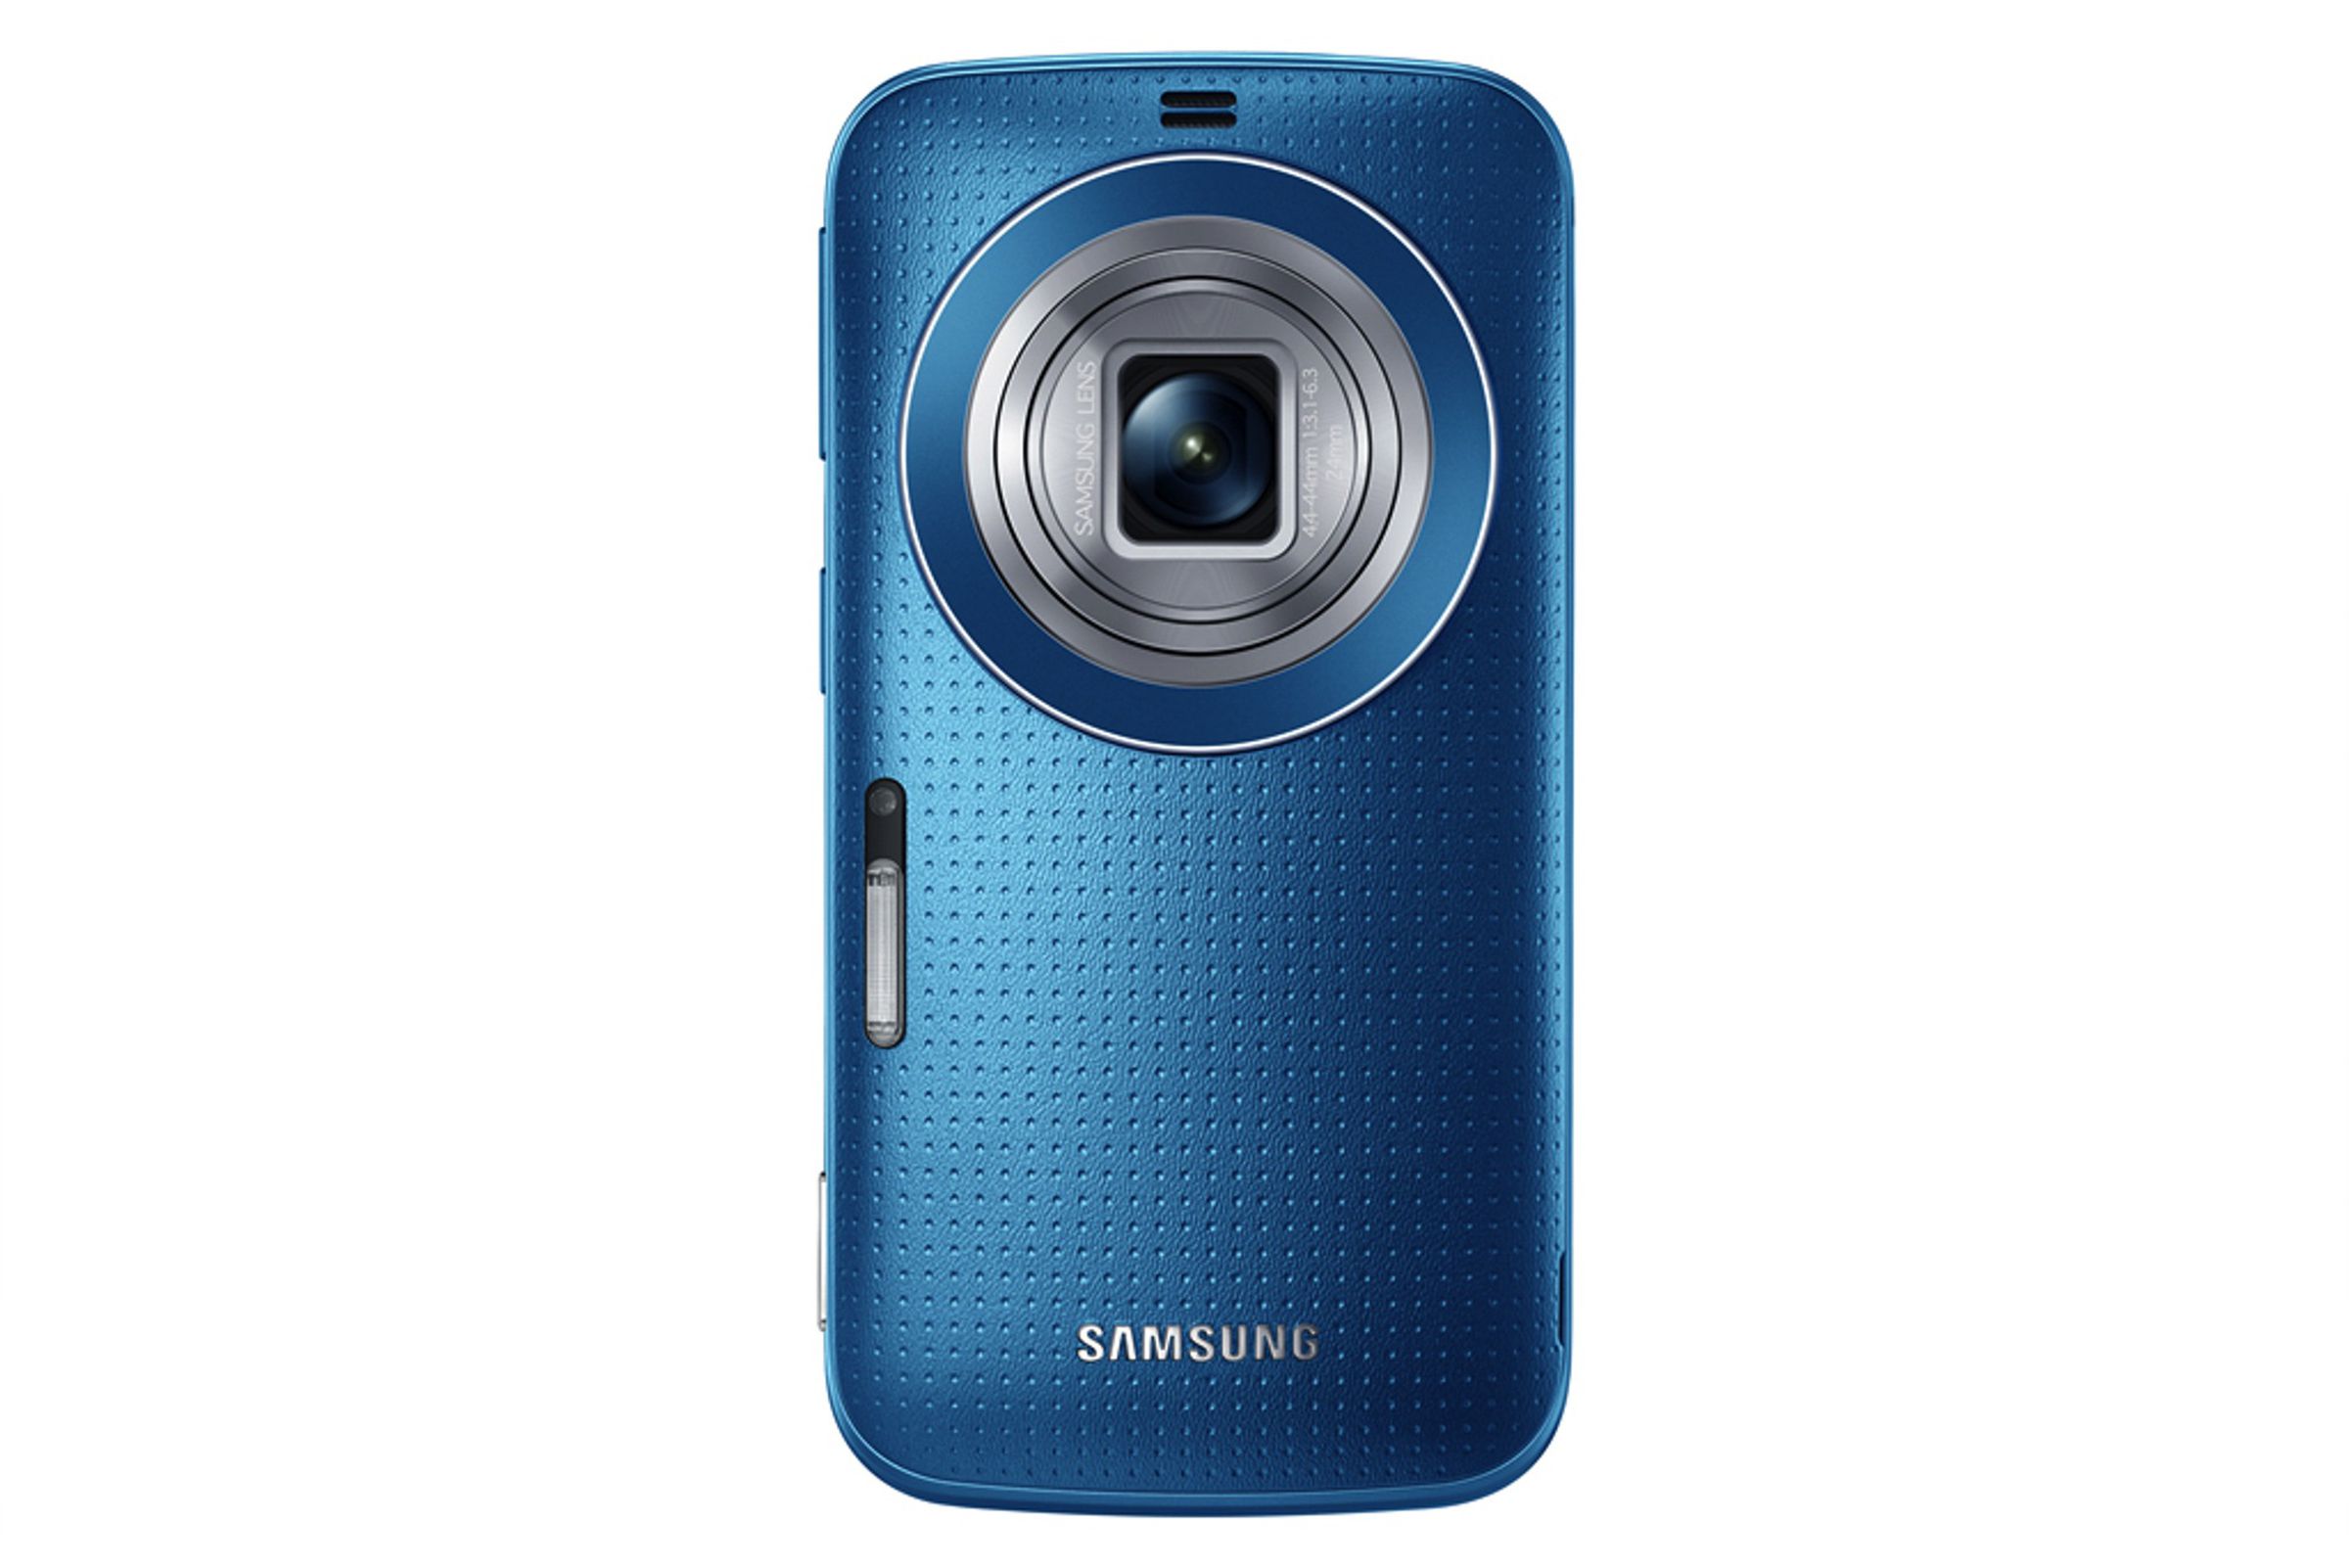 Samsung Galaxy K Zoom pictures